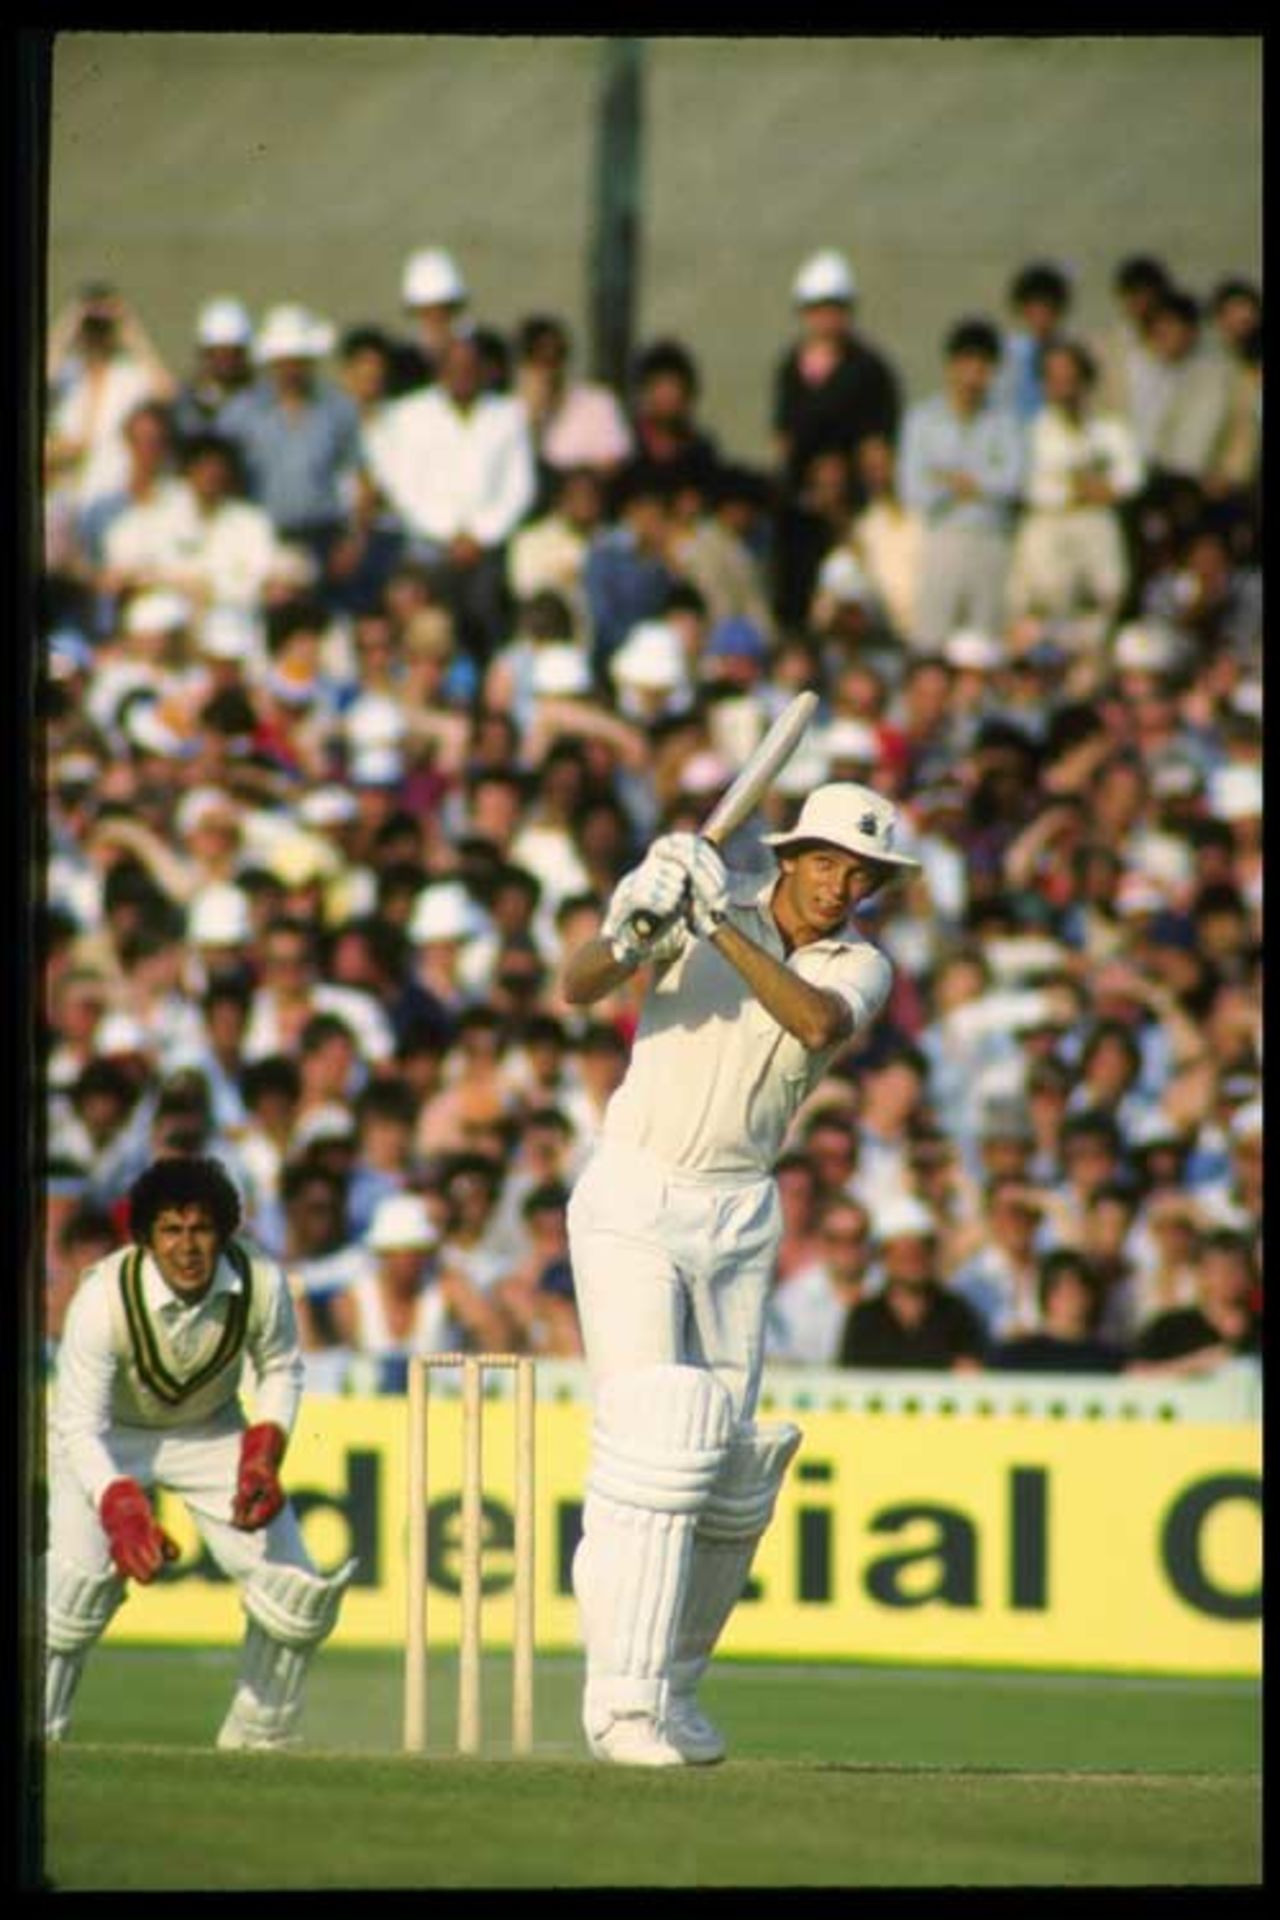 David Gower on-drives during the World Cup match between England and Pakistan at Old Trafford